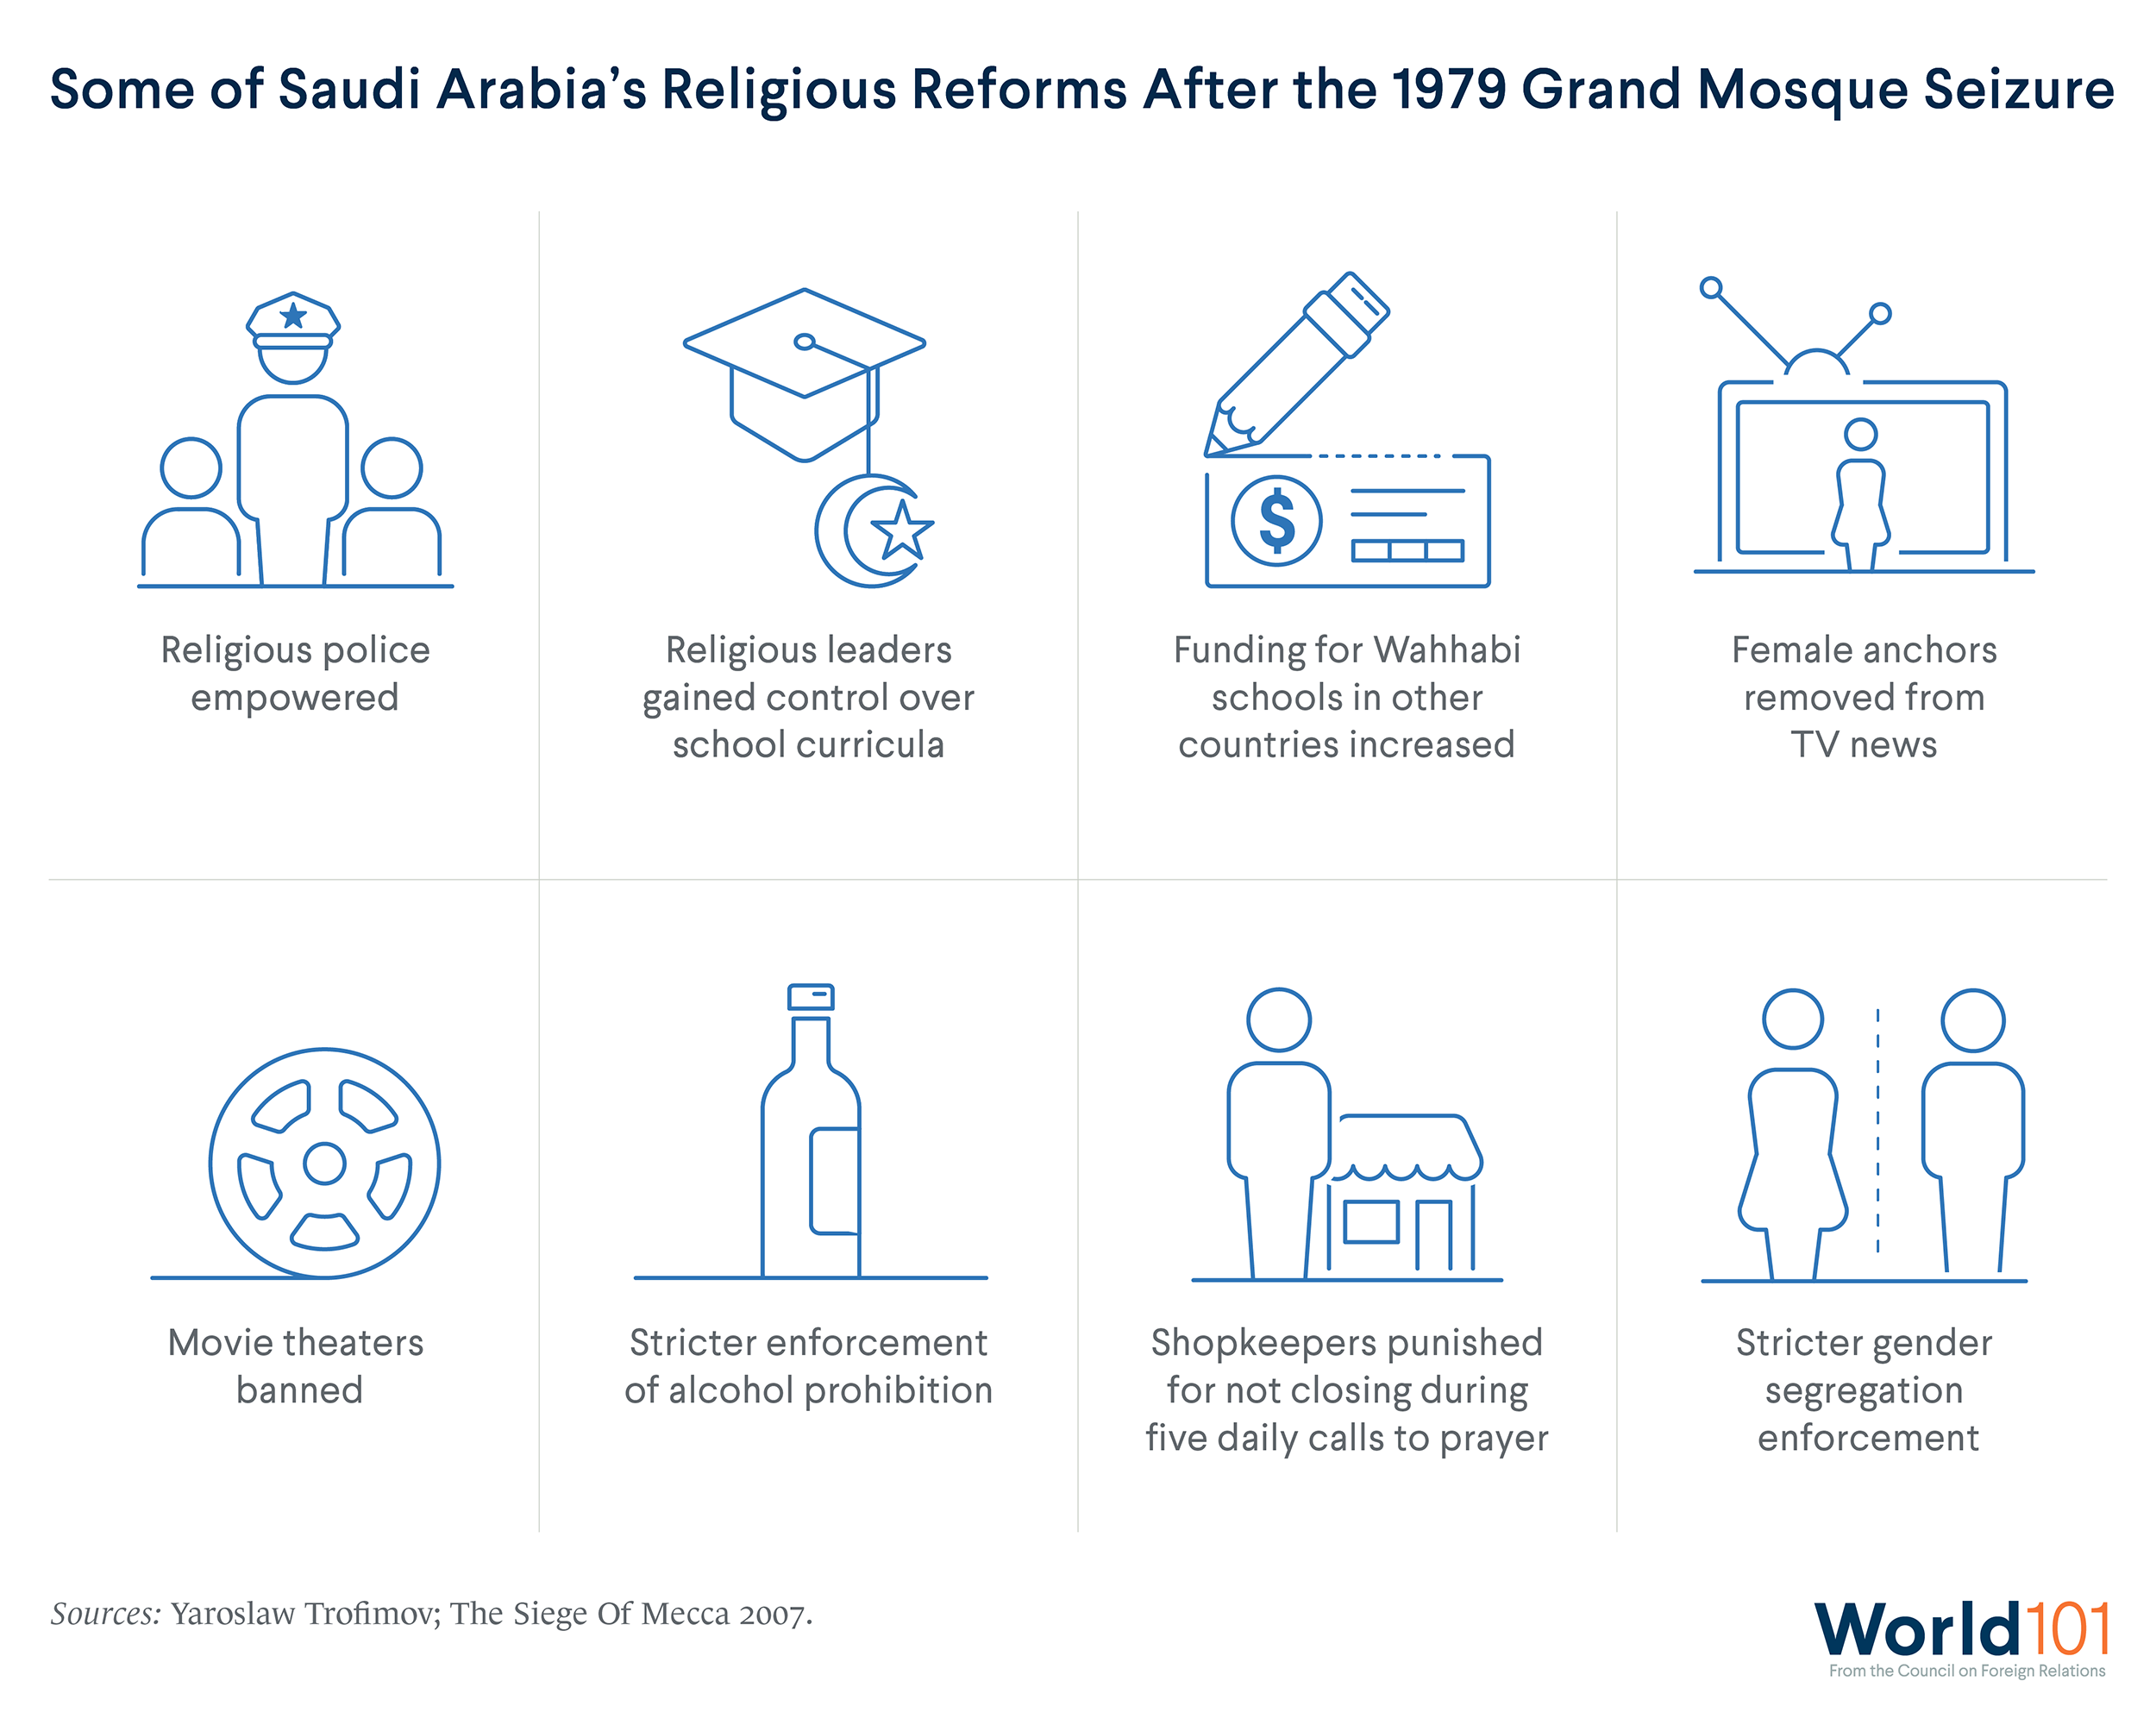 Infographic illustrating Saudi Arabia's reforms after 1979 Grand Mosque Seizure. Saudi government rolled back women’s rights, enforced gender segregation in public, and gave clerics greater control. For more info contact us at world101@cfr.org.